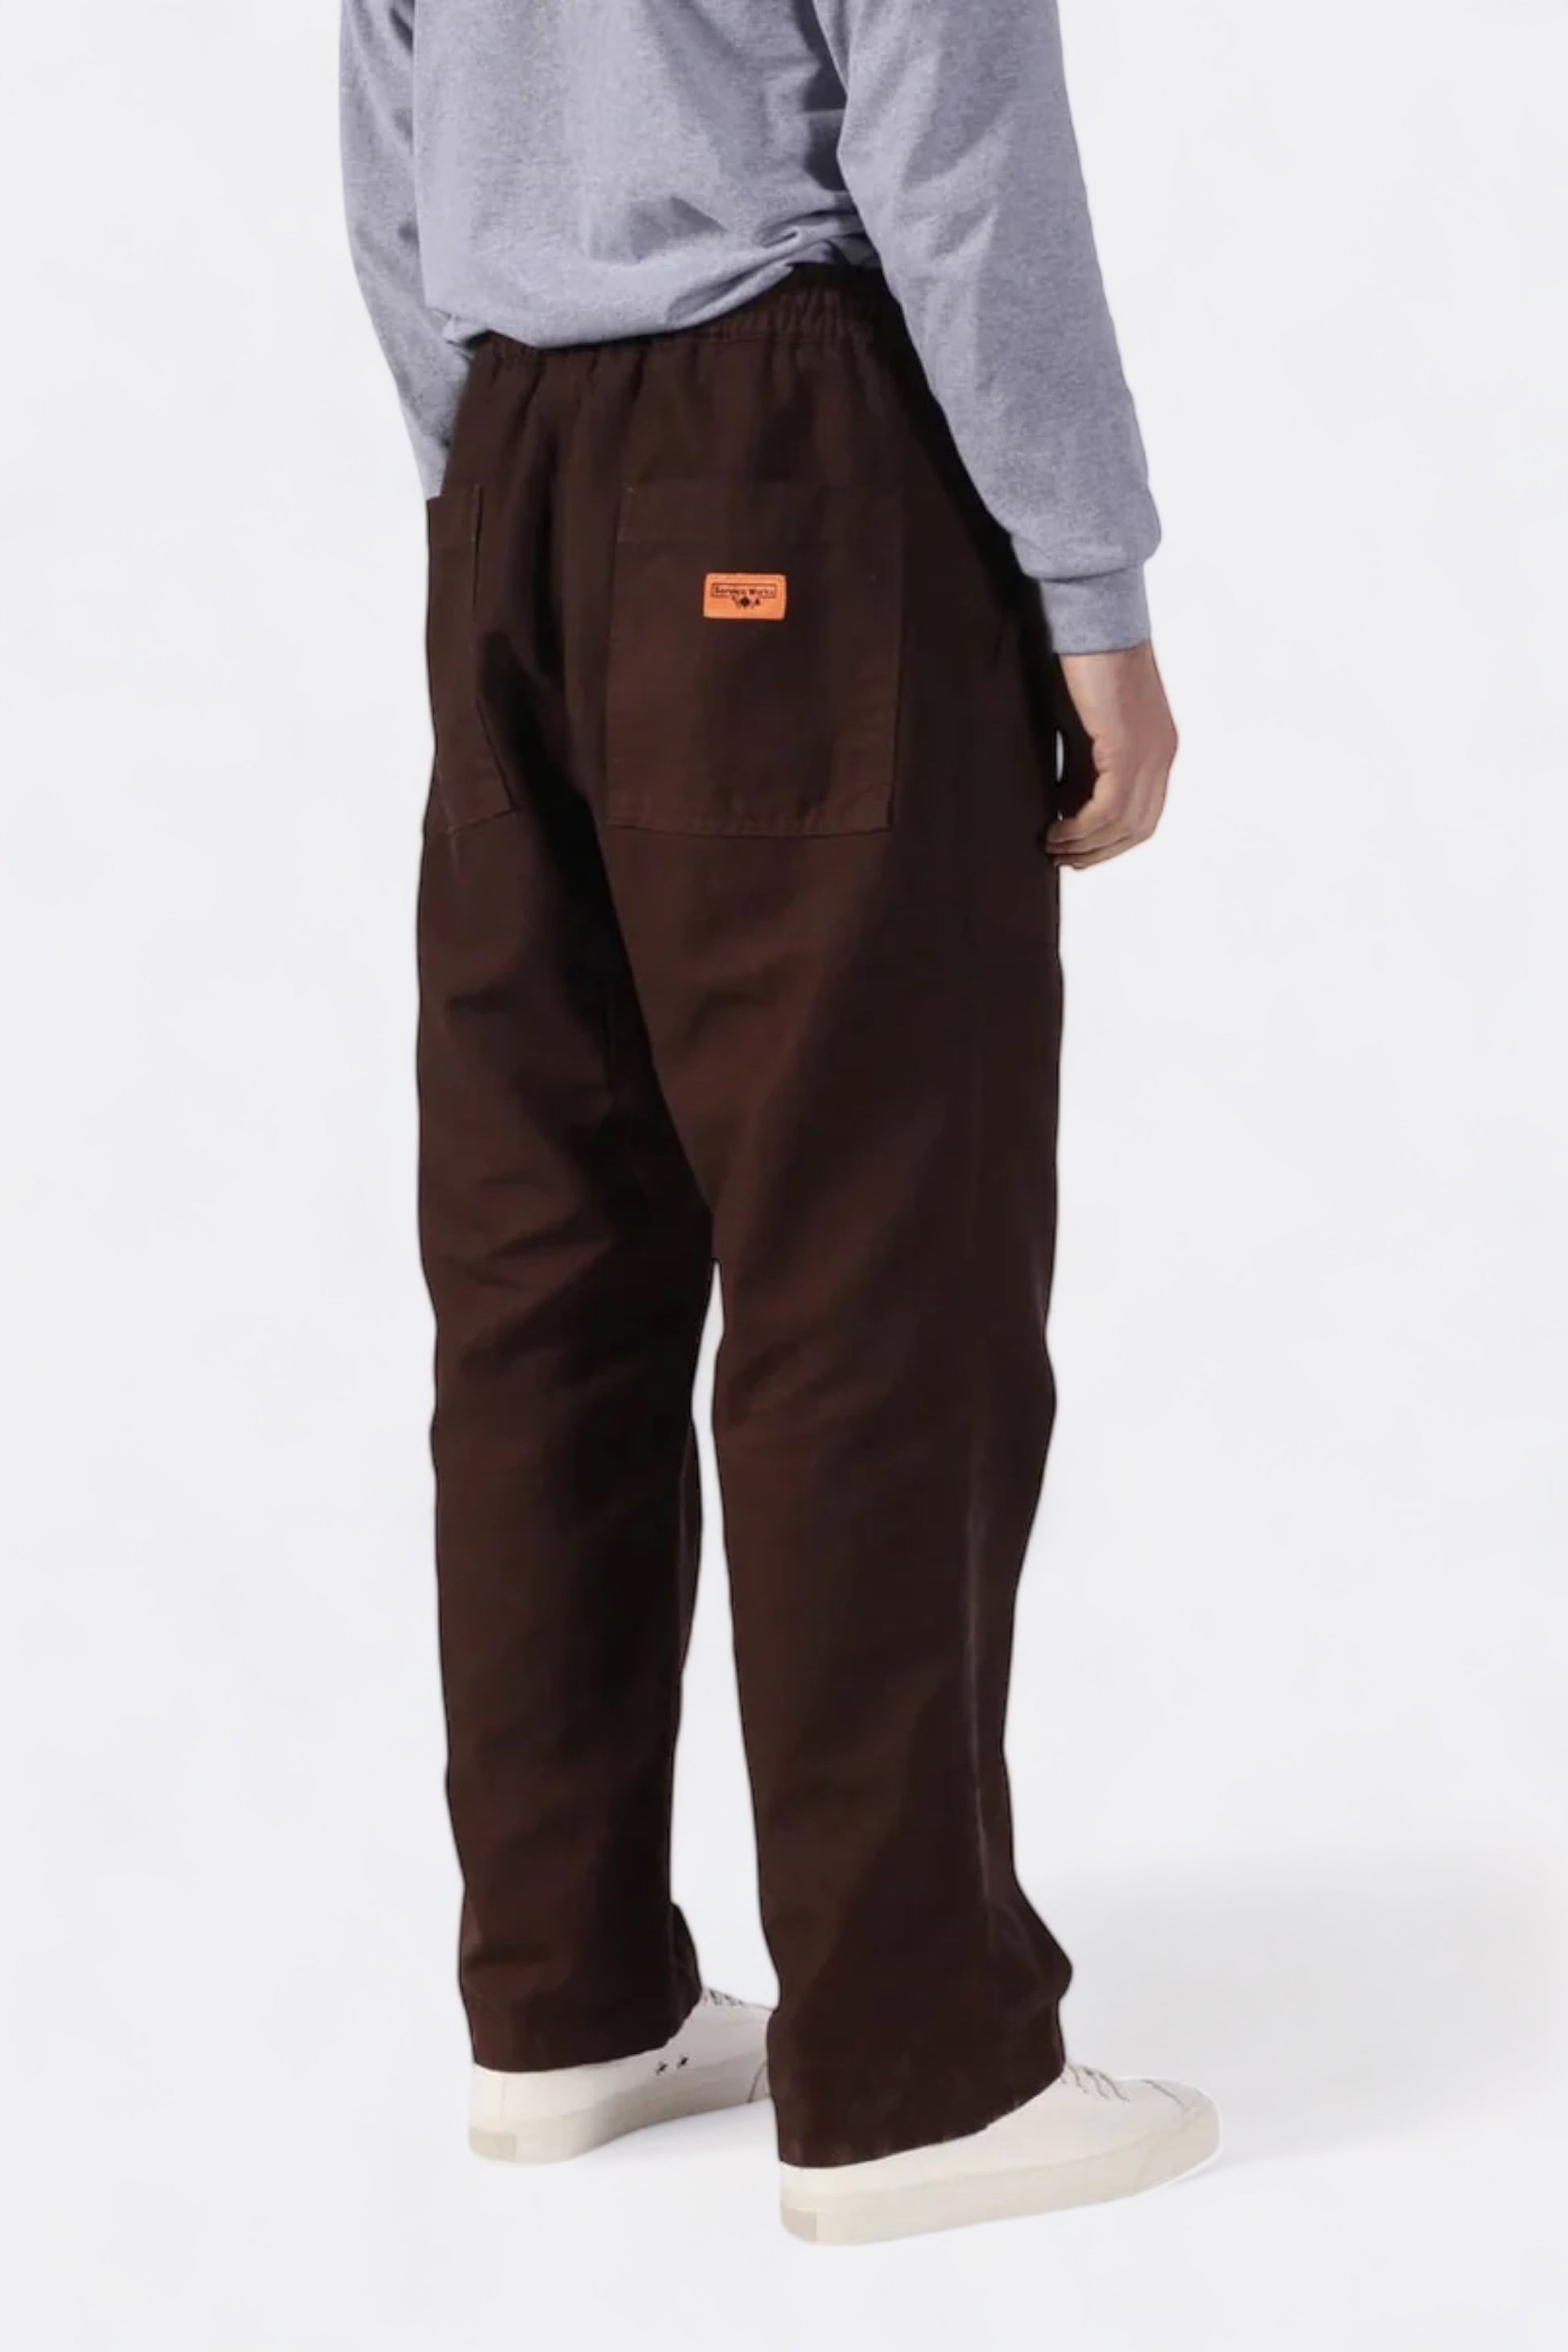 Service Works - Classic Chef Pants (Stone)